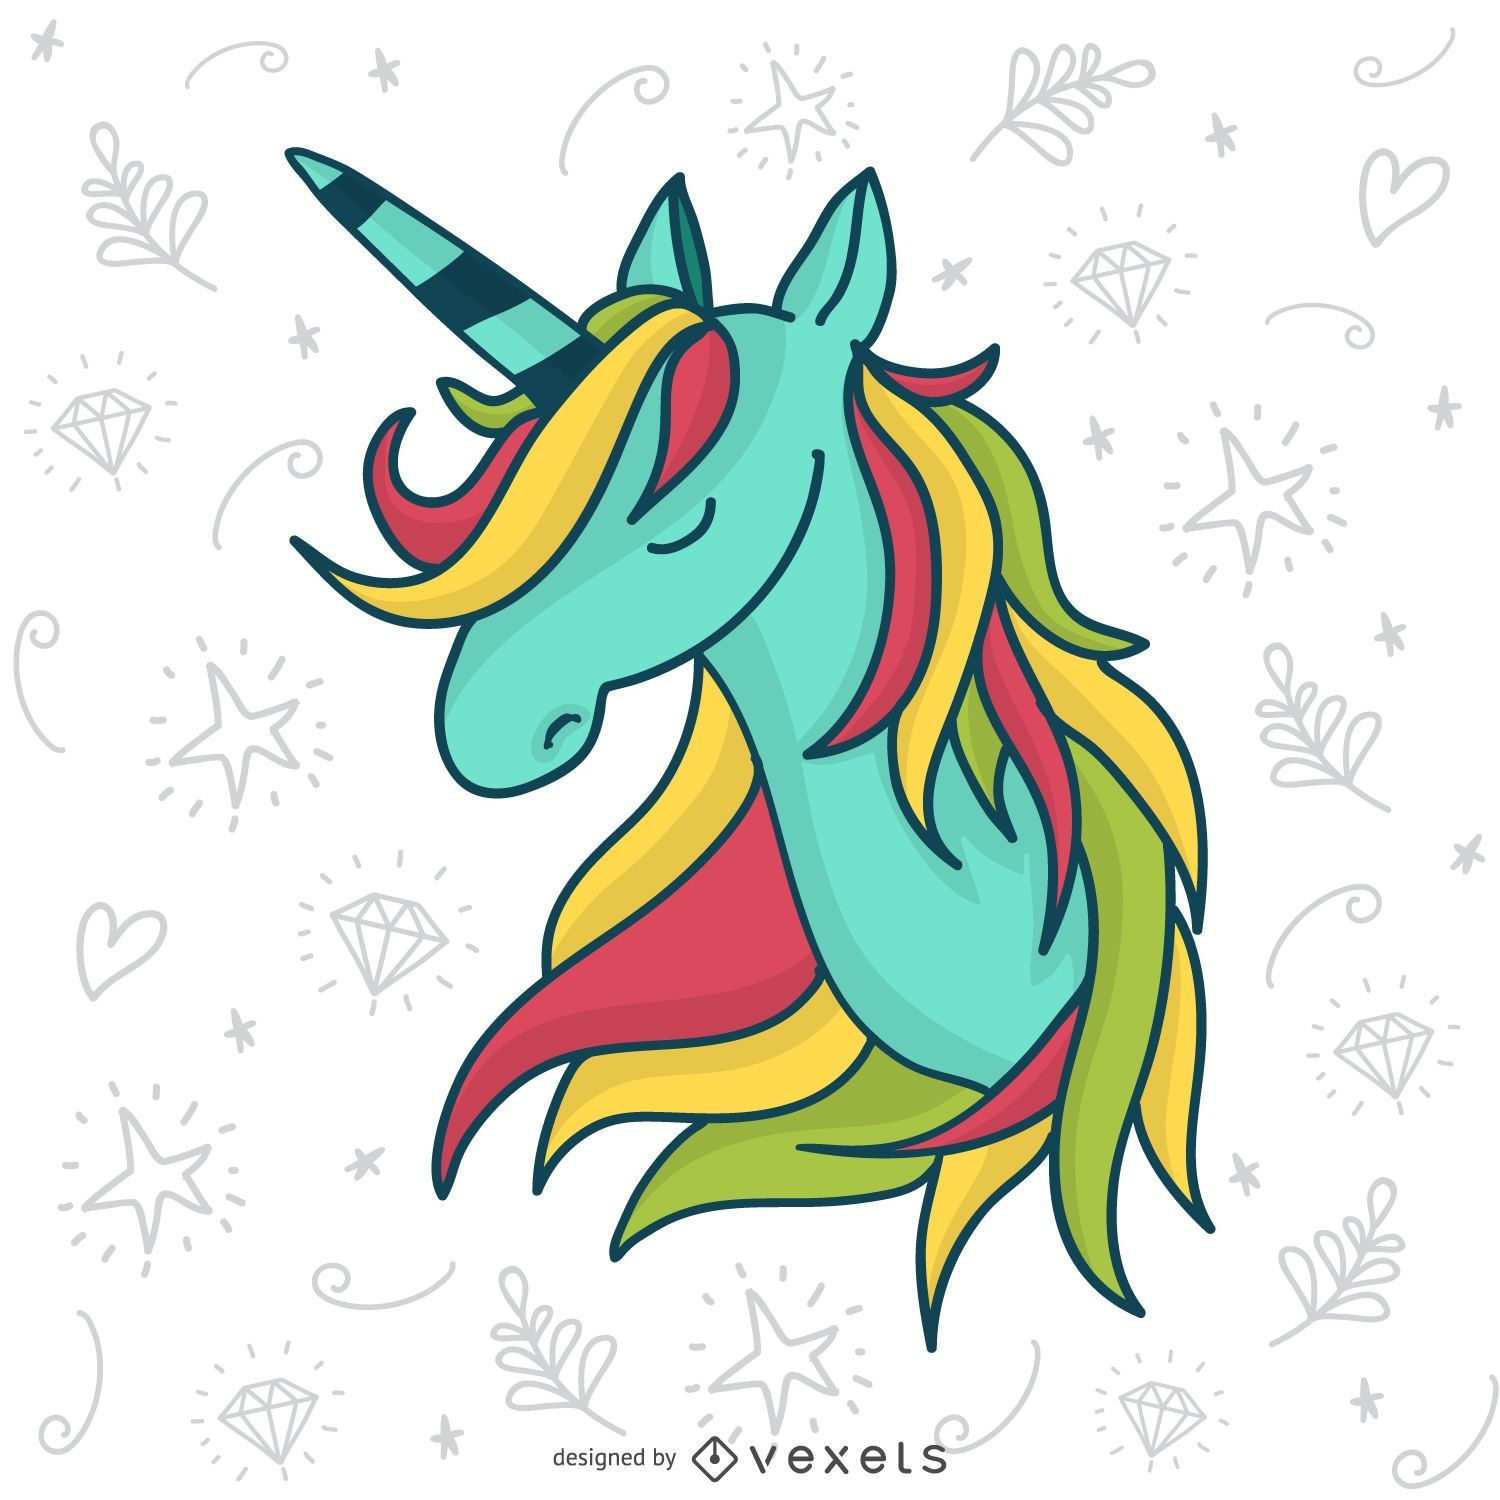 Unicorn Face Coloring Page in Illustrator, PDF, SVG, JPG, EPS, PNG -  Download | Template.net